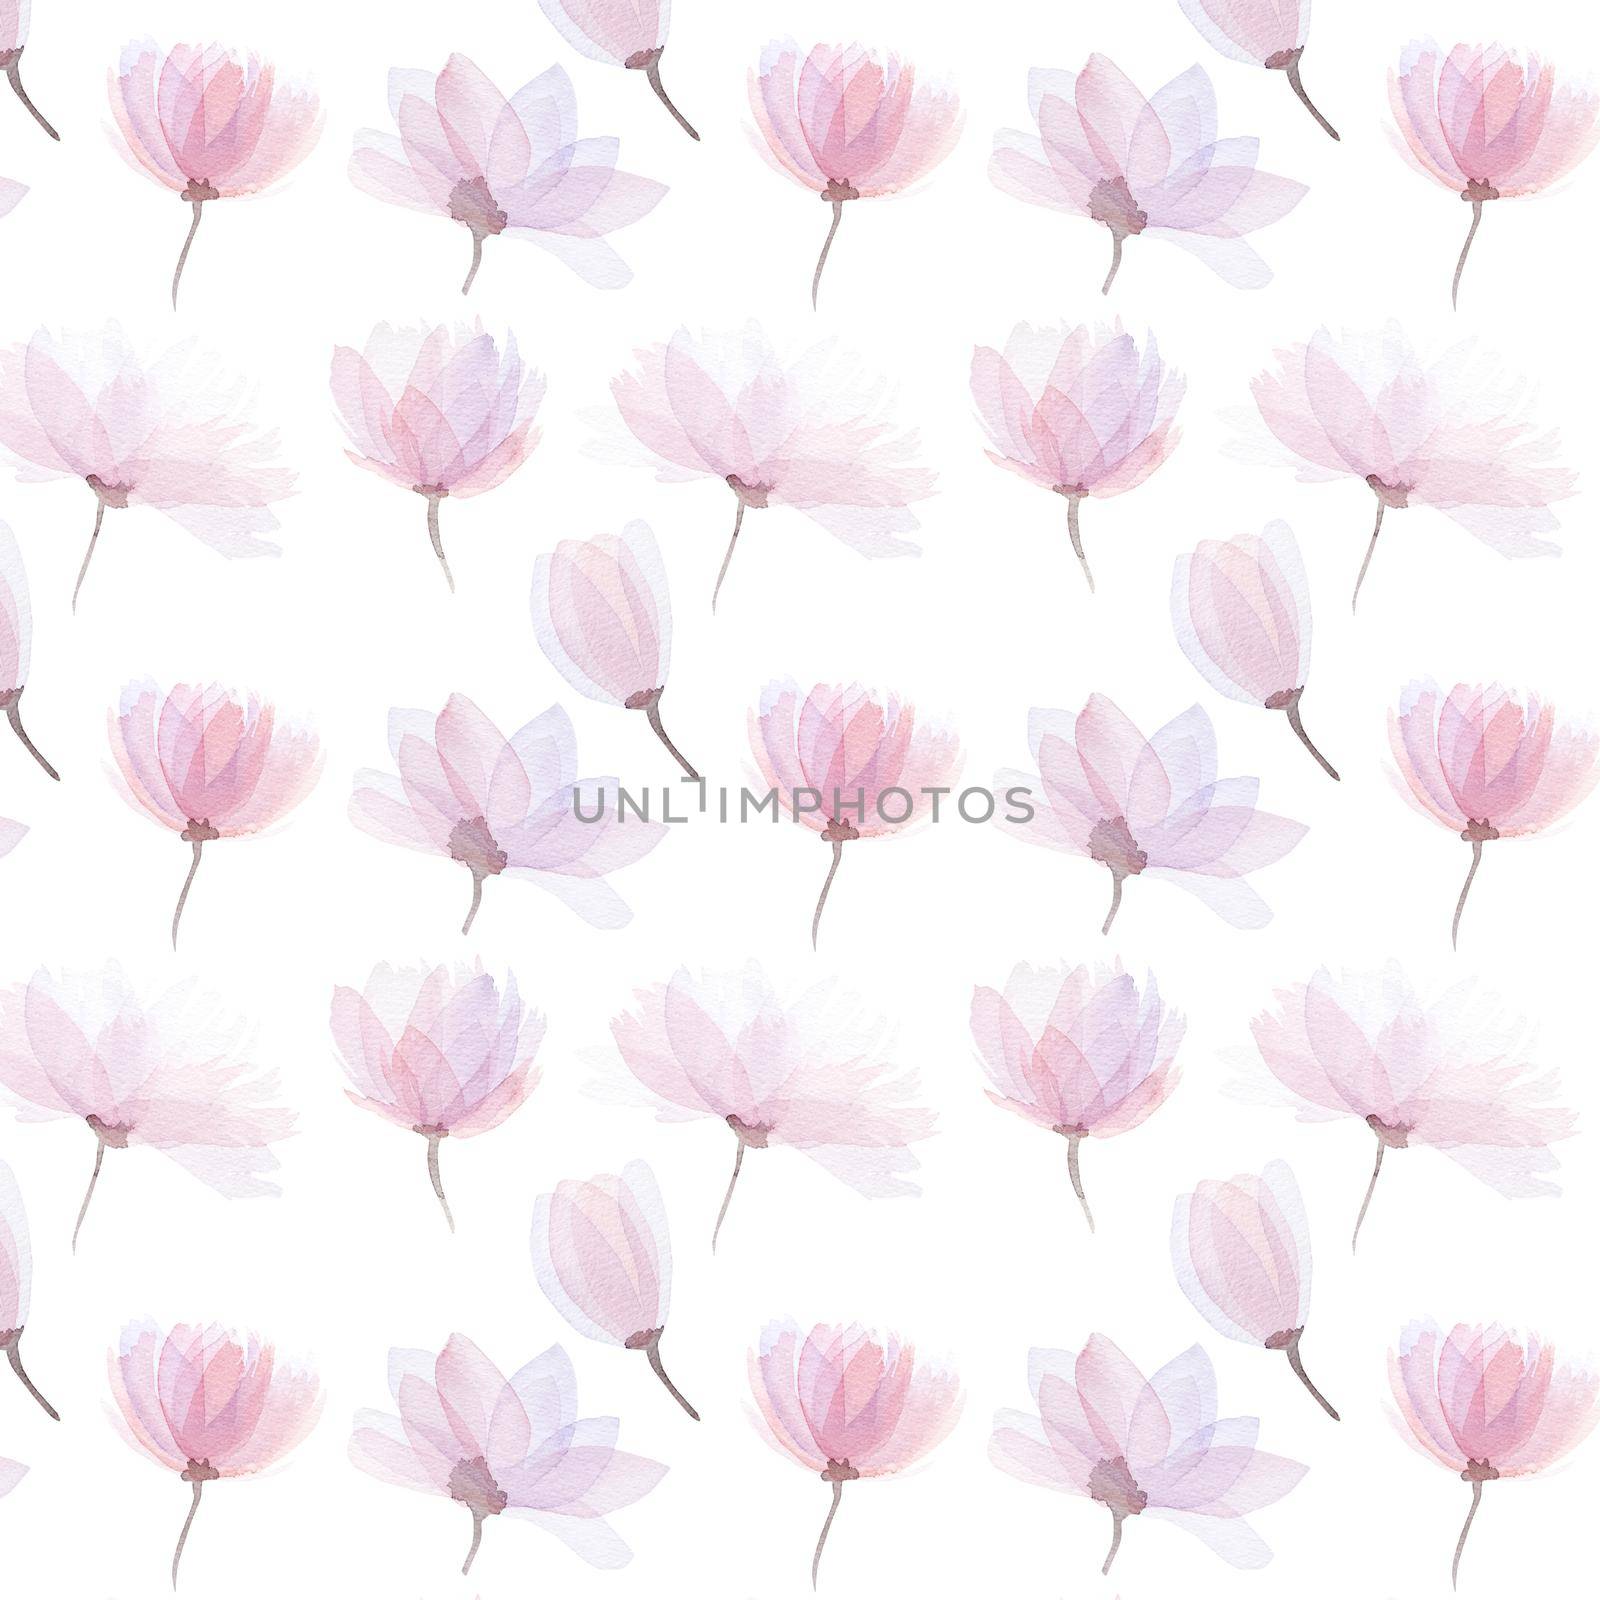 Watercolor seamless pattern flowers paints on white paper. Beautiful aquarelle floral card with blossom